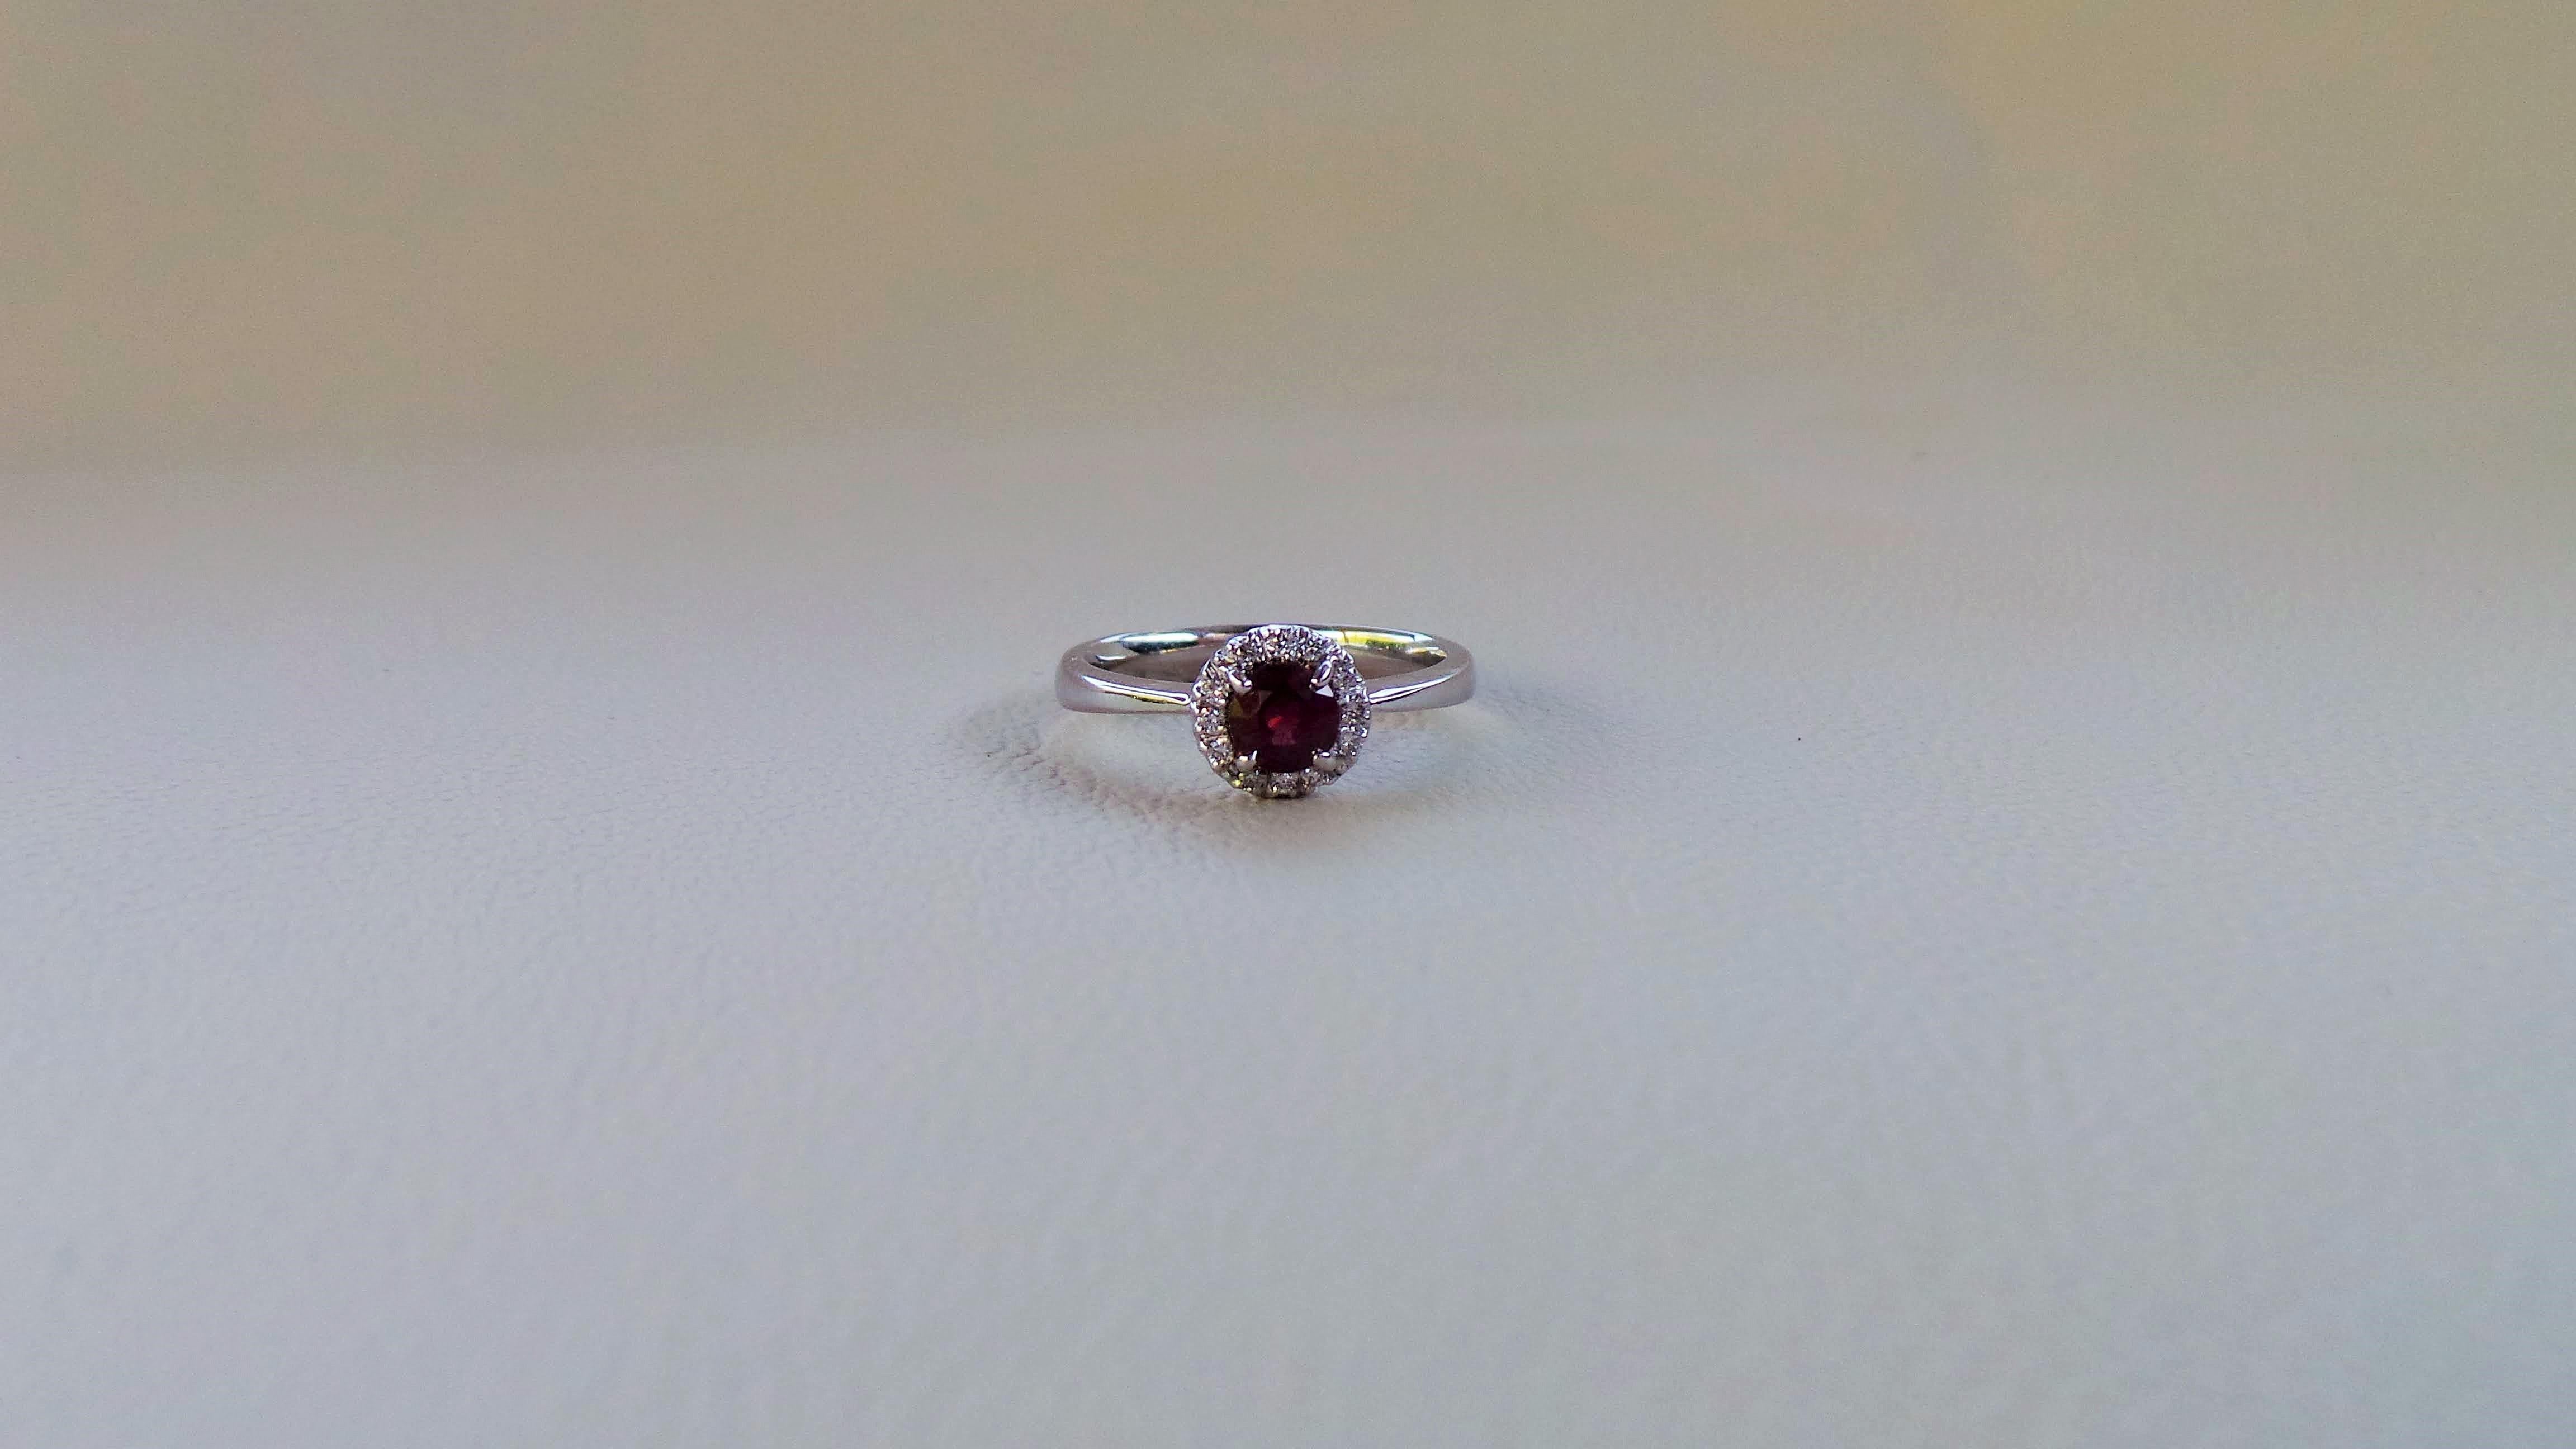 Andrea Macinai design a dedicated collection for engament rings with a beautiful ruby round red  and diamonds.
Designed and built the ring following the natural line of the stone.
0.5 carat round ruby red complimented by 12 round diamonds cut